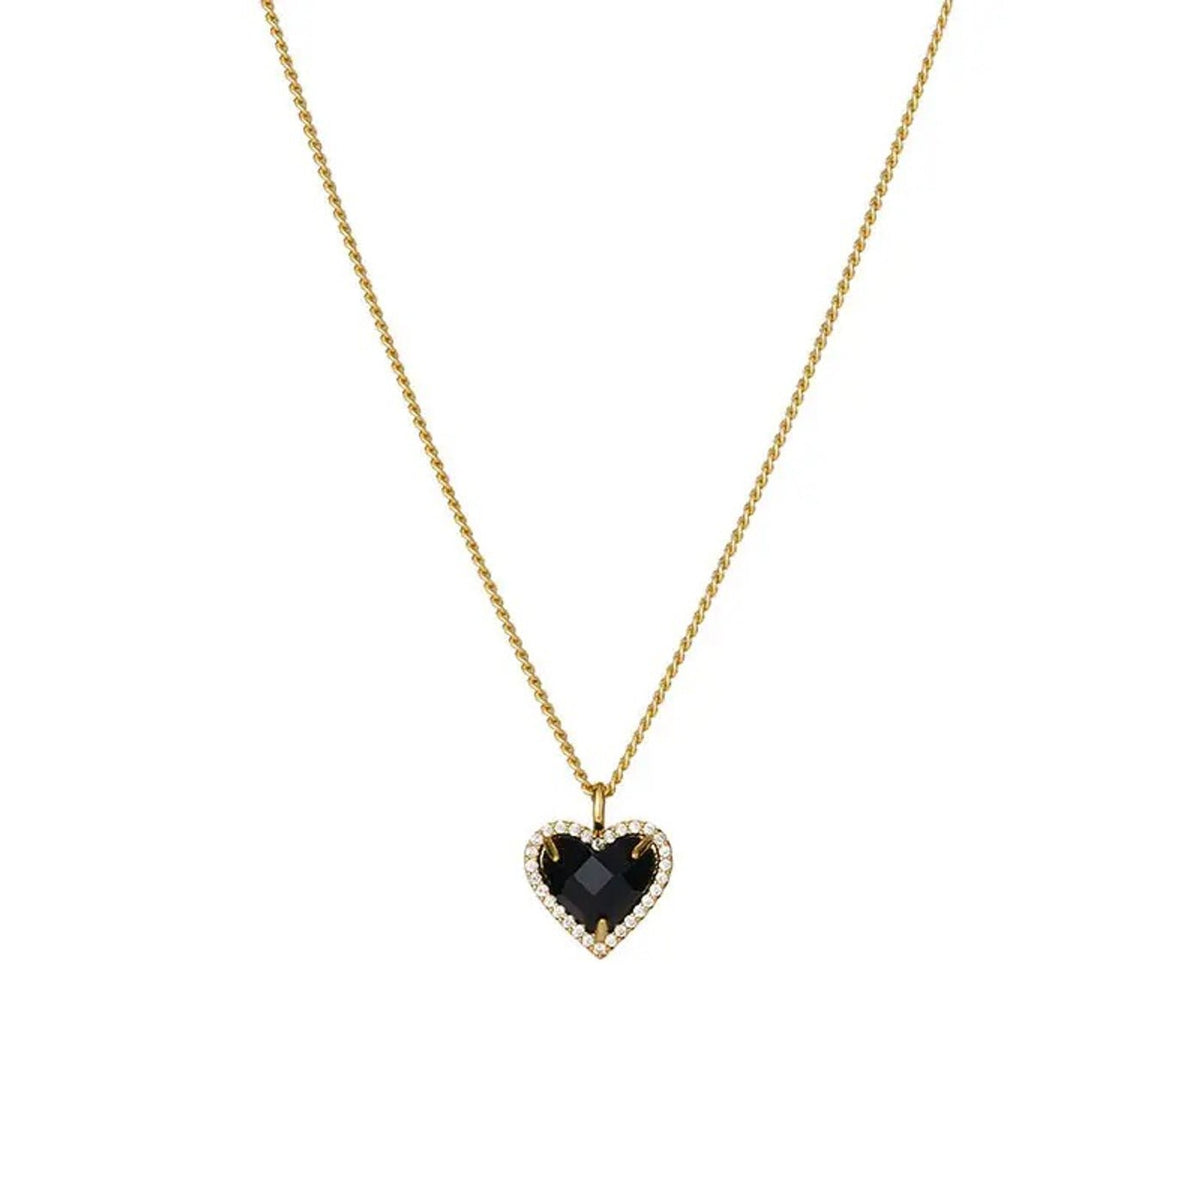 heart 18k gold plated choker necklace may-i reliquia fandh frankly my dear